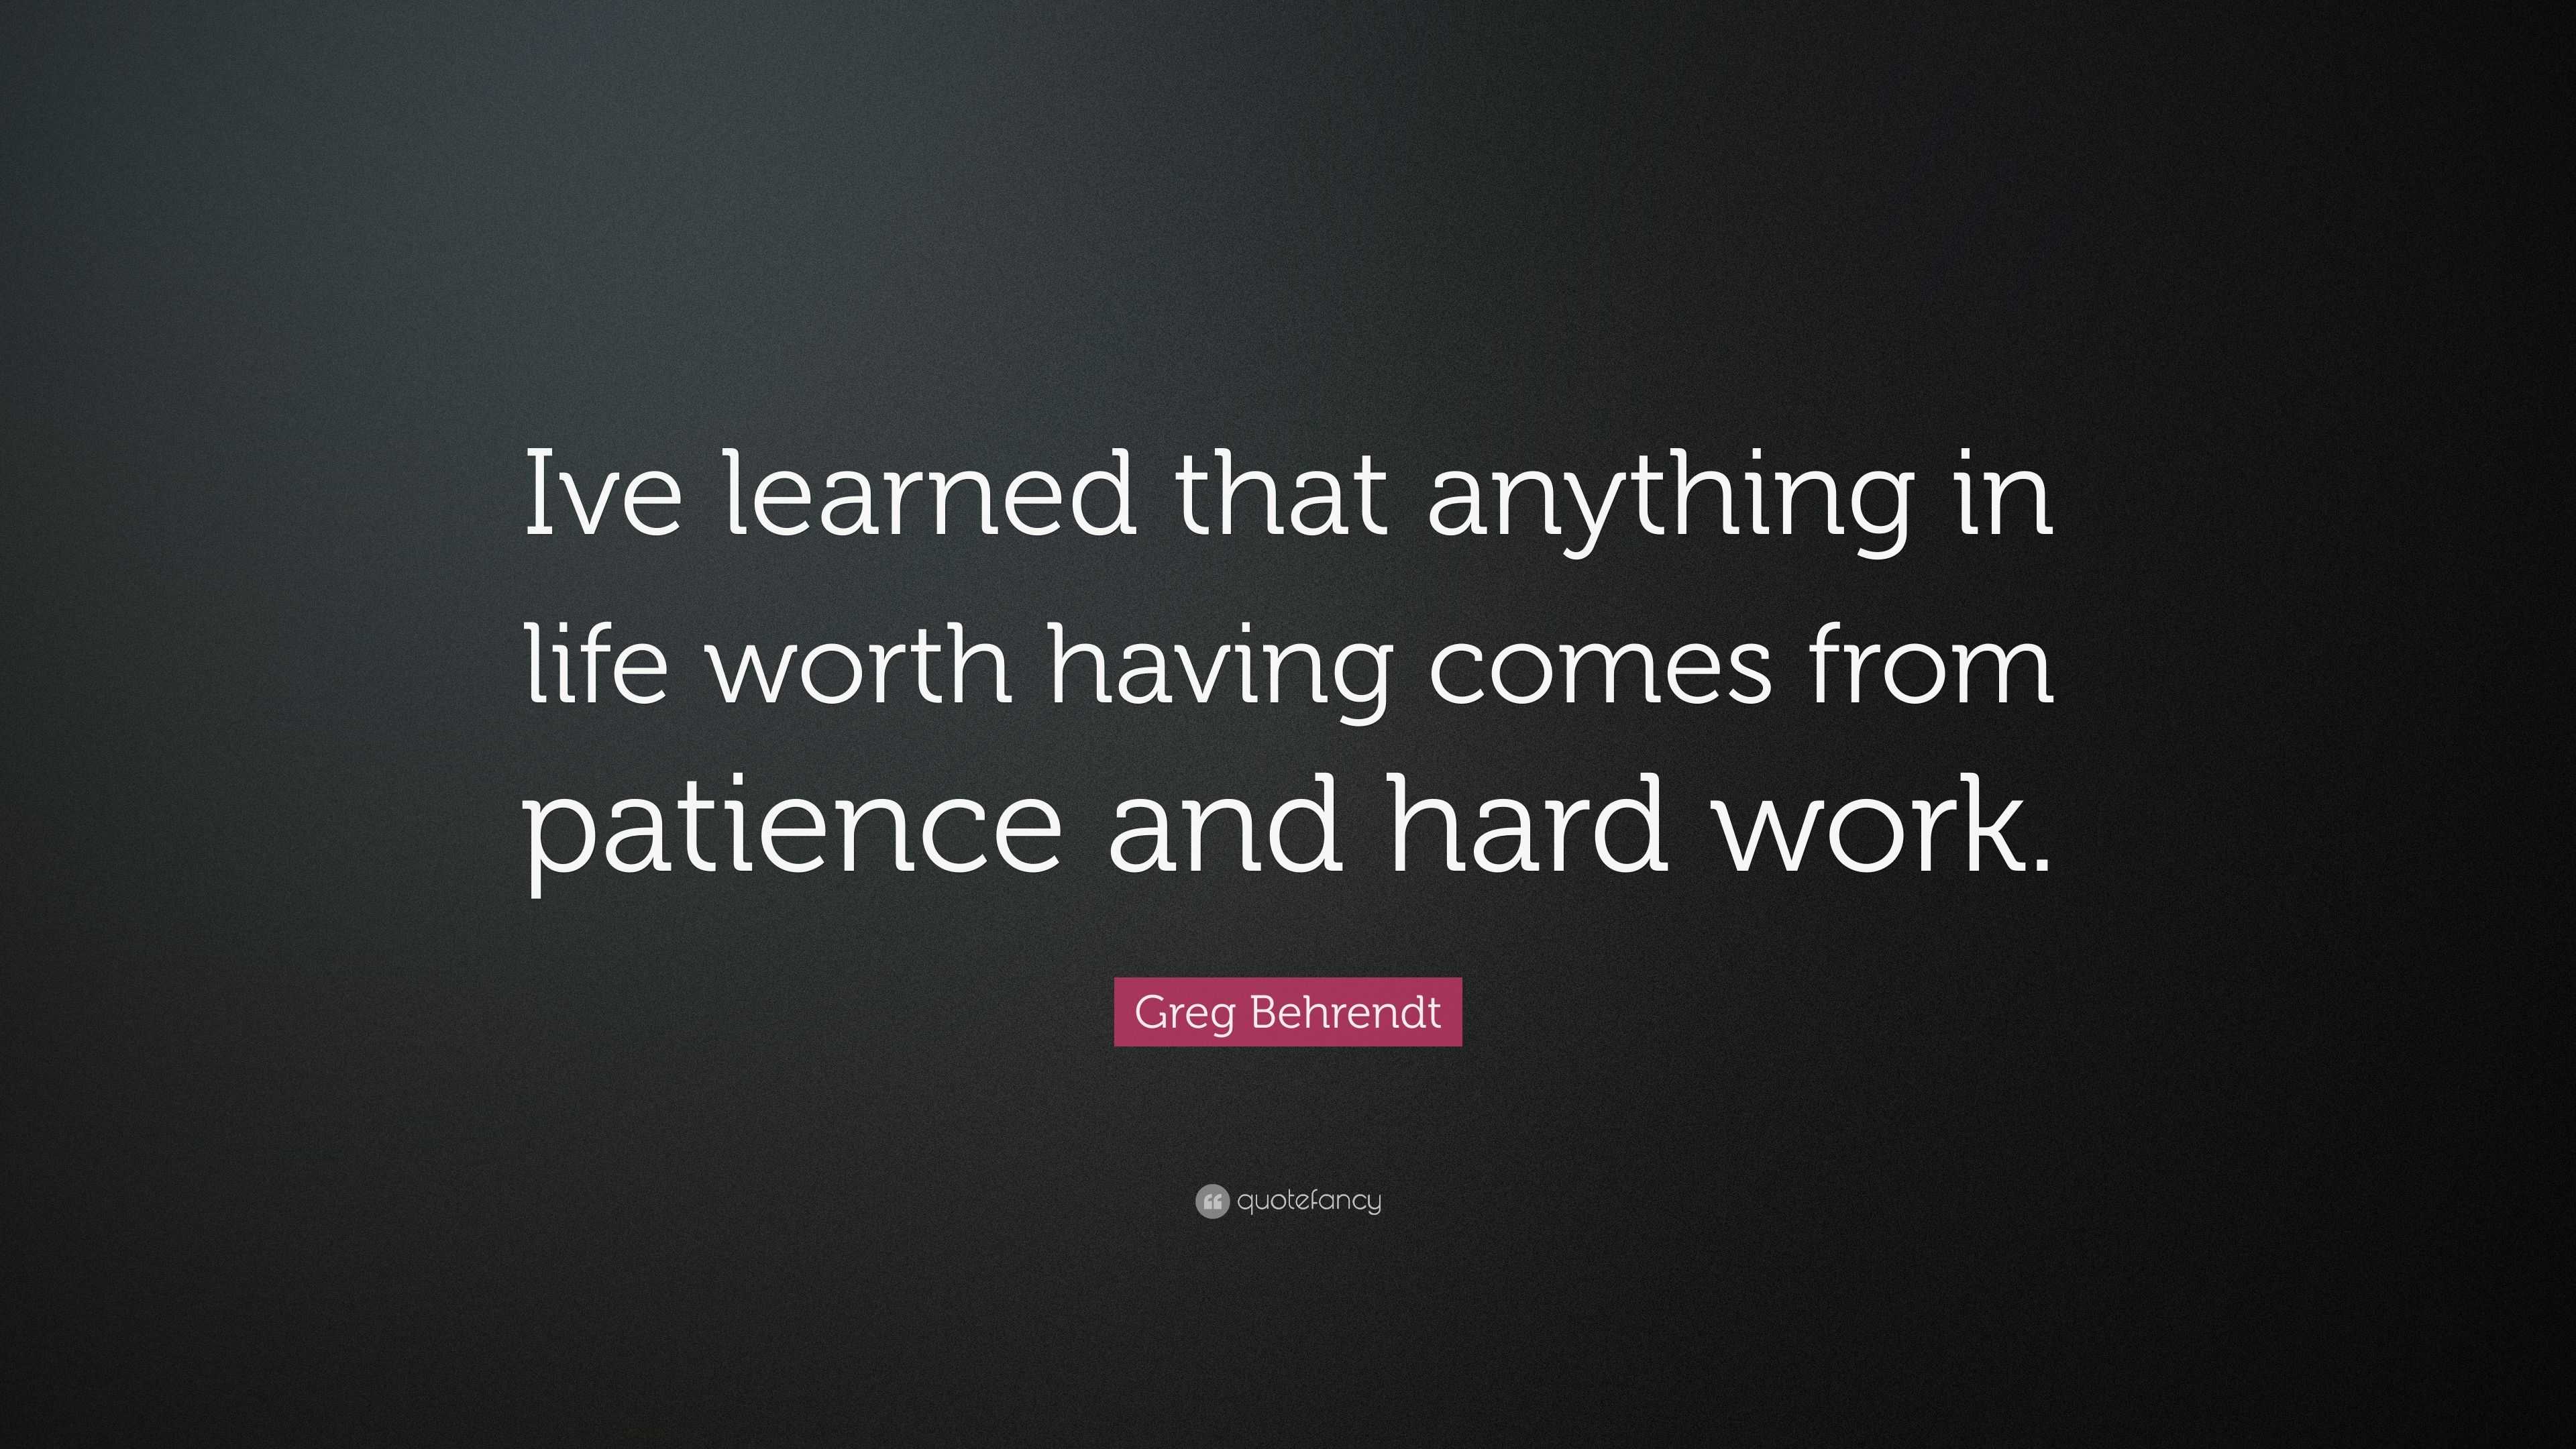 Greg Behrendt Quote: “Ive learned that anything in life worth having ...